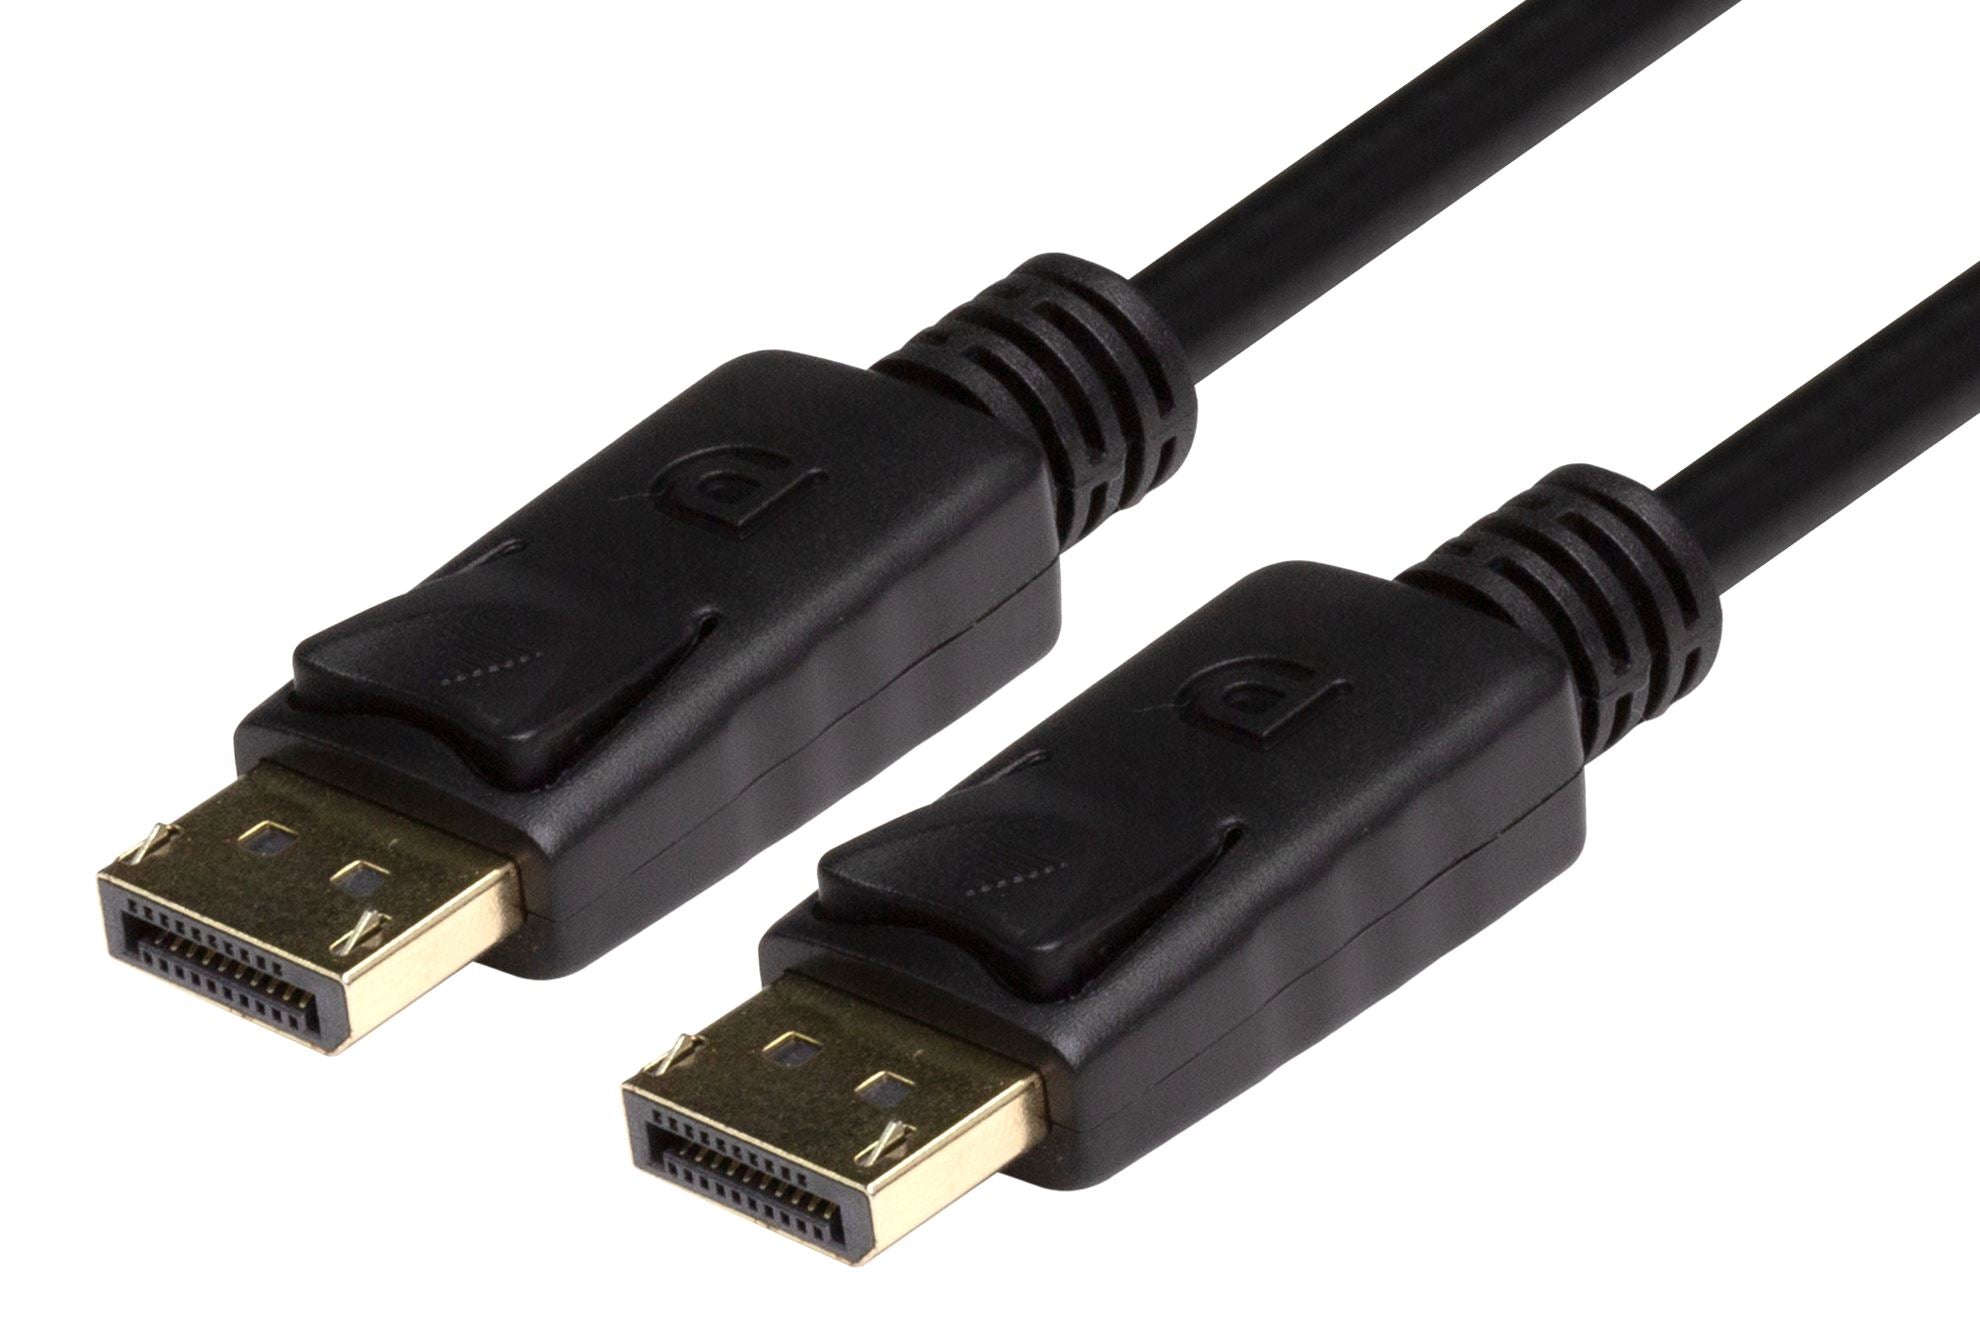 DYNAMIX_1.5m_DisplayPort_V1.4_Cable_Supports_up_to_8K_(FUHD)_Resolution._28AWG,_M/M_DP_Connectors,_Max._Res_7680x4320_@_60Hz,_Latched_Connectors,_Flexible_Cable,_Gold-Plated_Connectors. 574